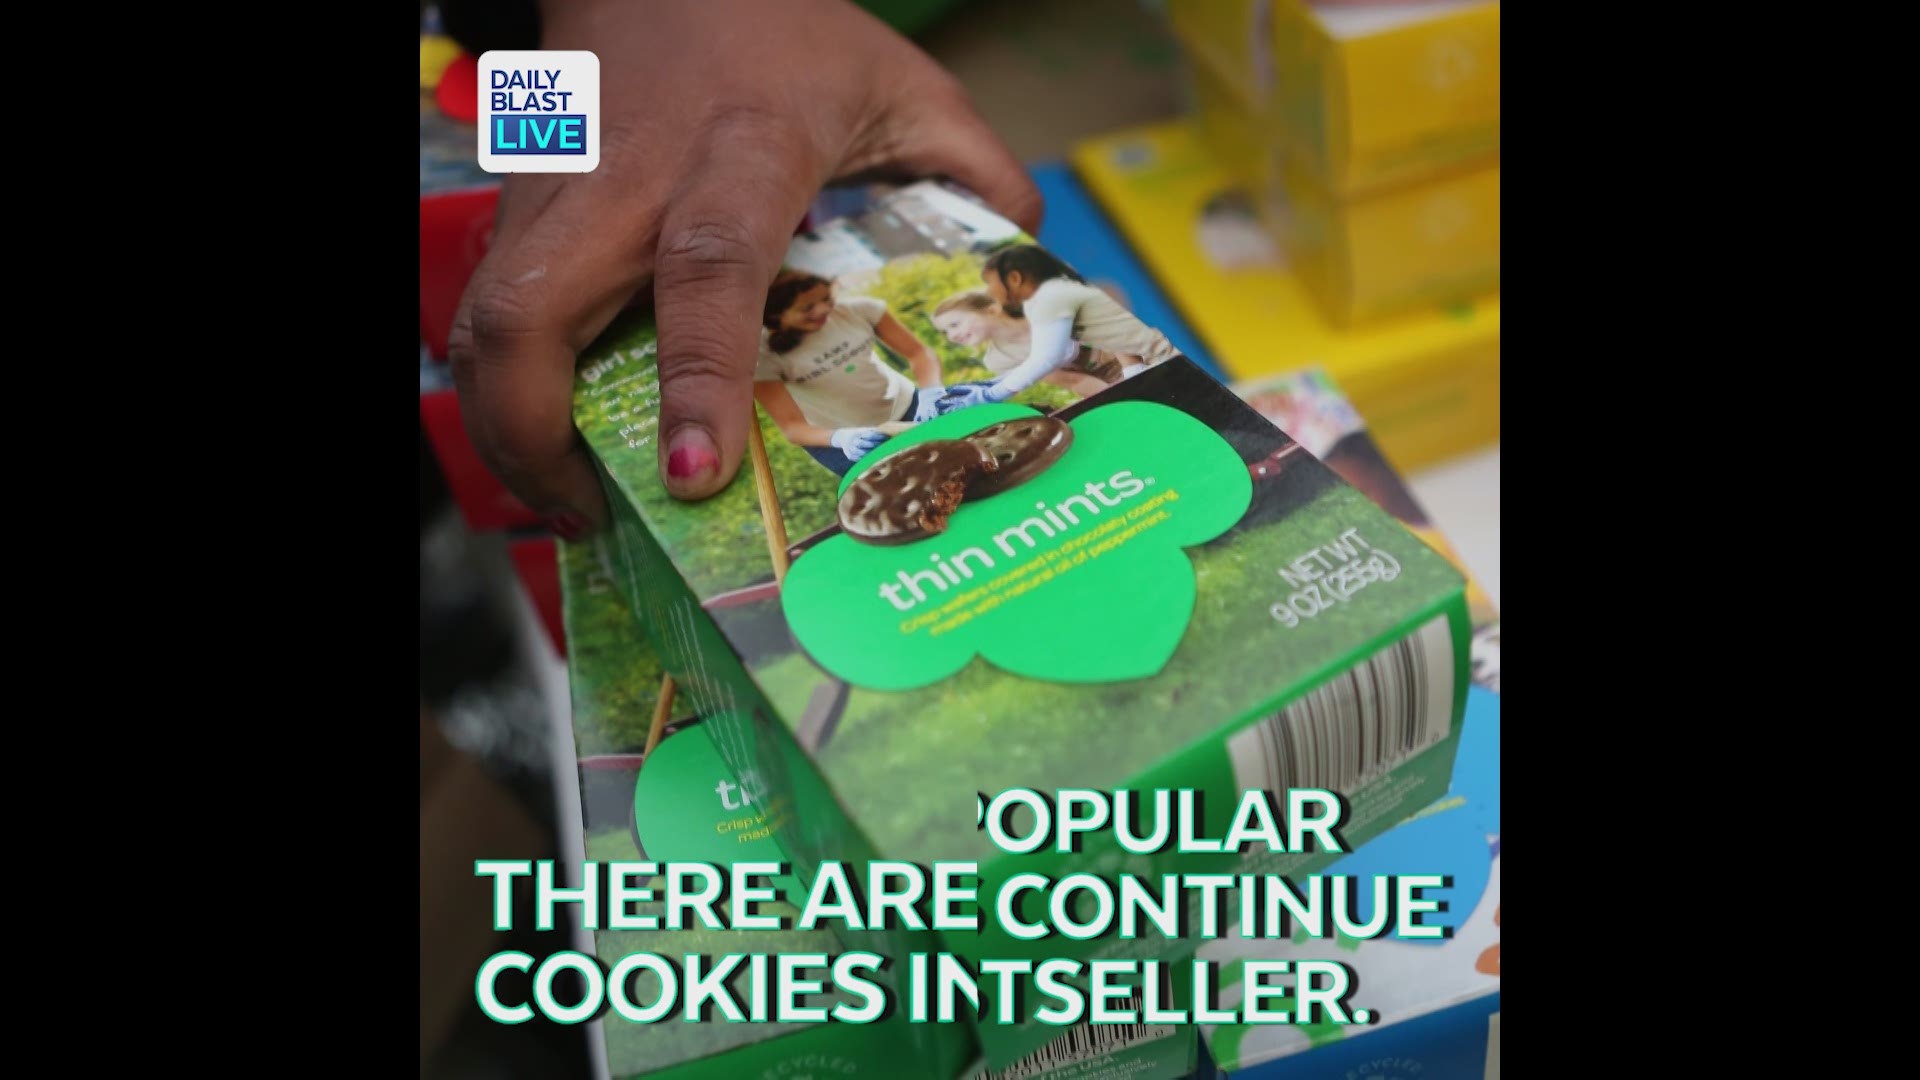 The most wonderful time of the year has arrived - Girl Scout cookie season.